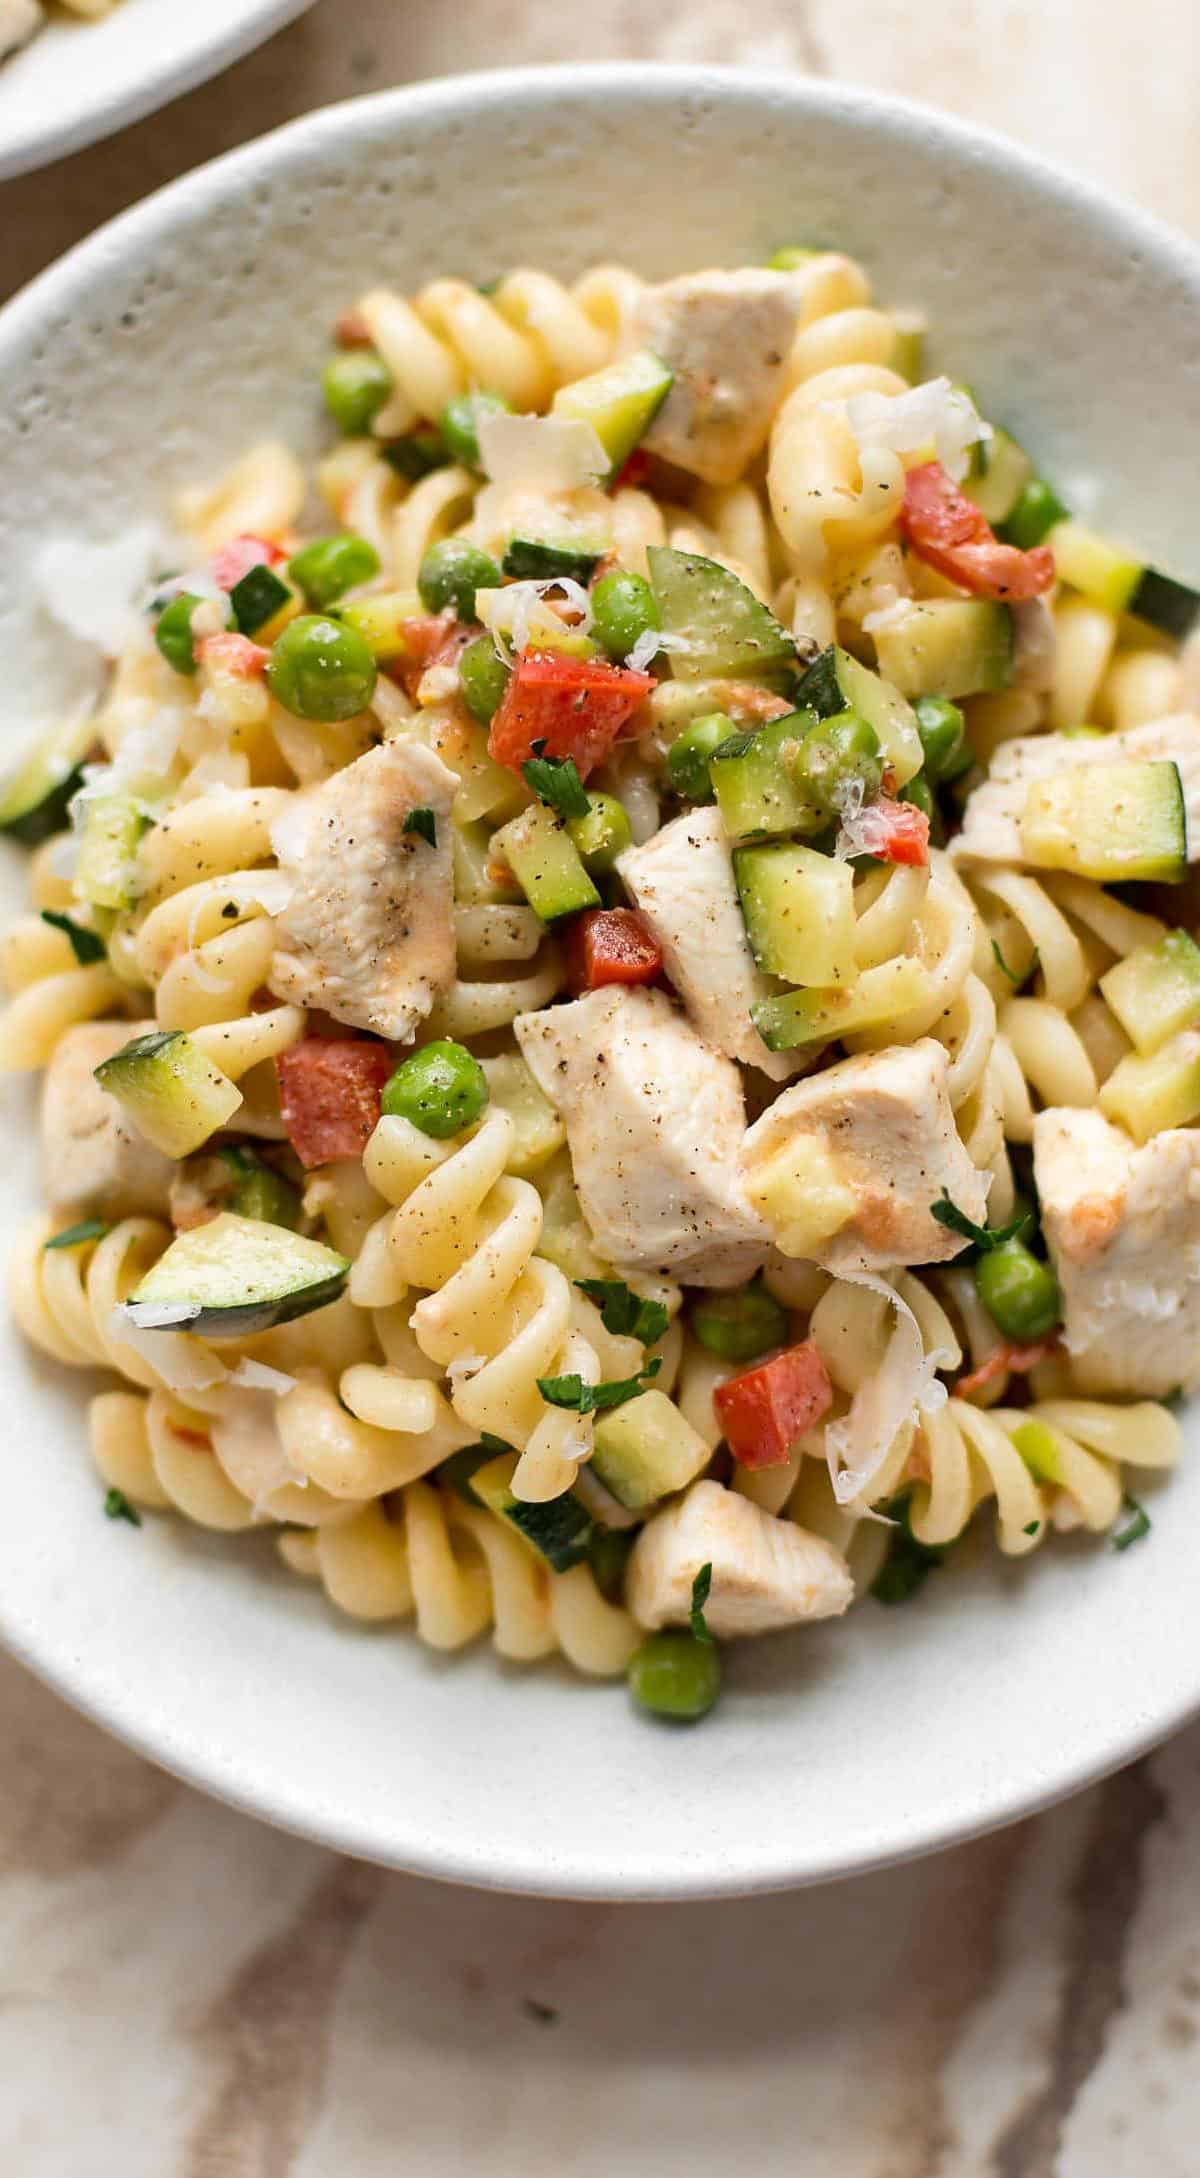  Pasta and chicken, the perfect duo to make your taste buds sing.